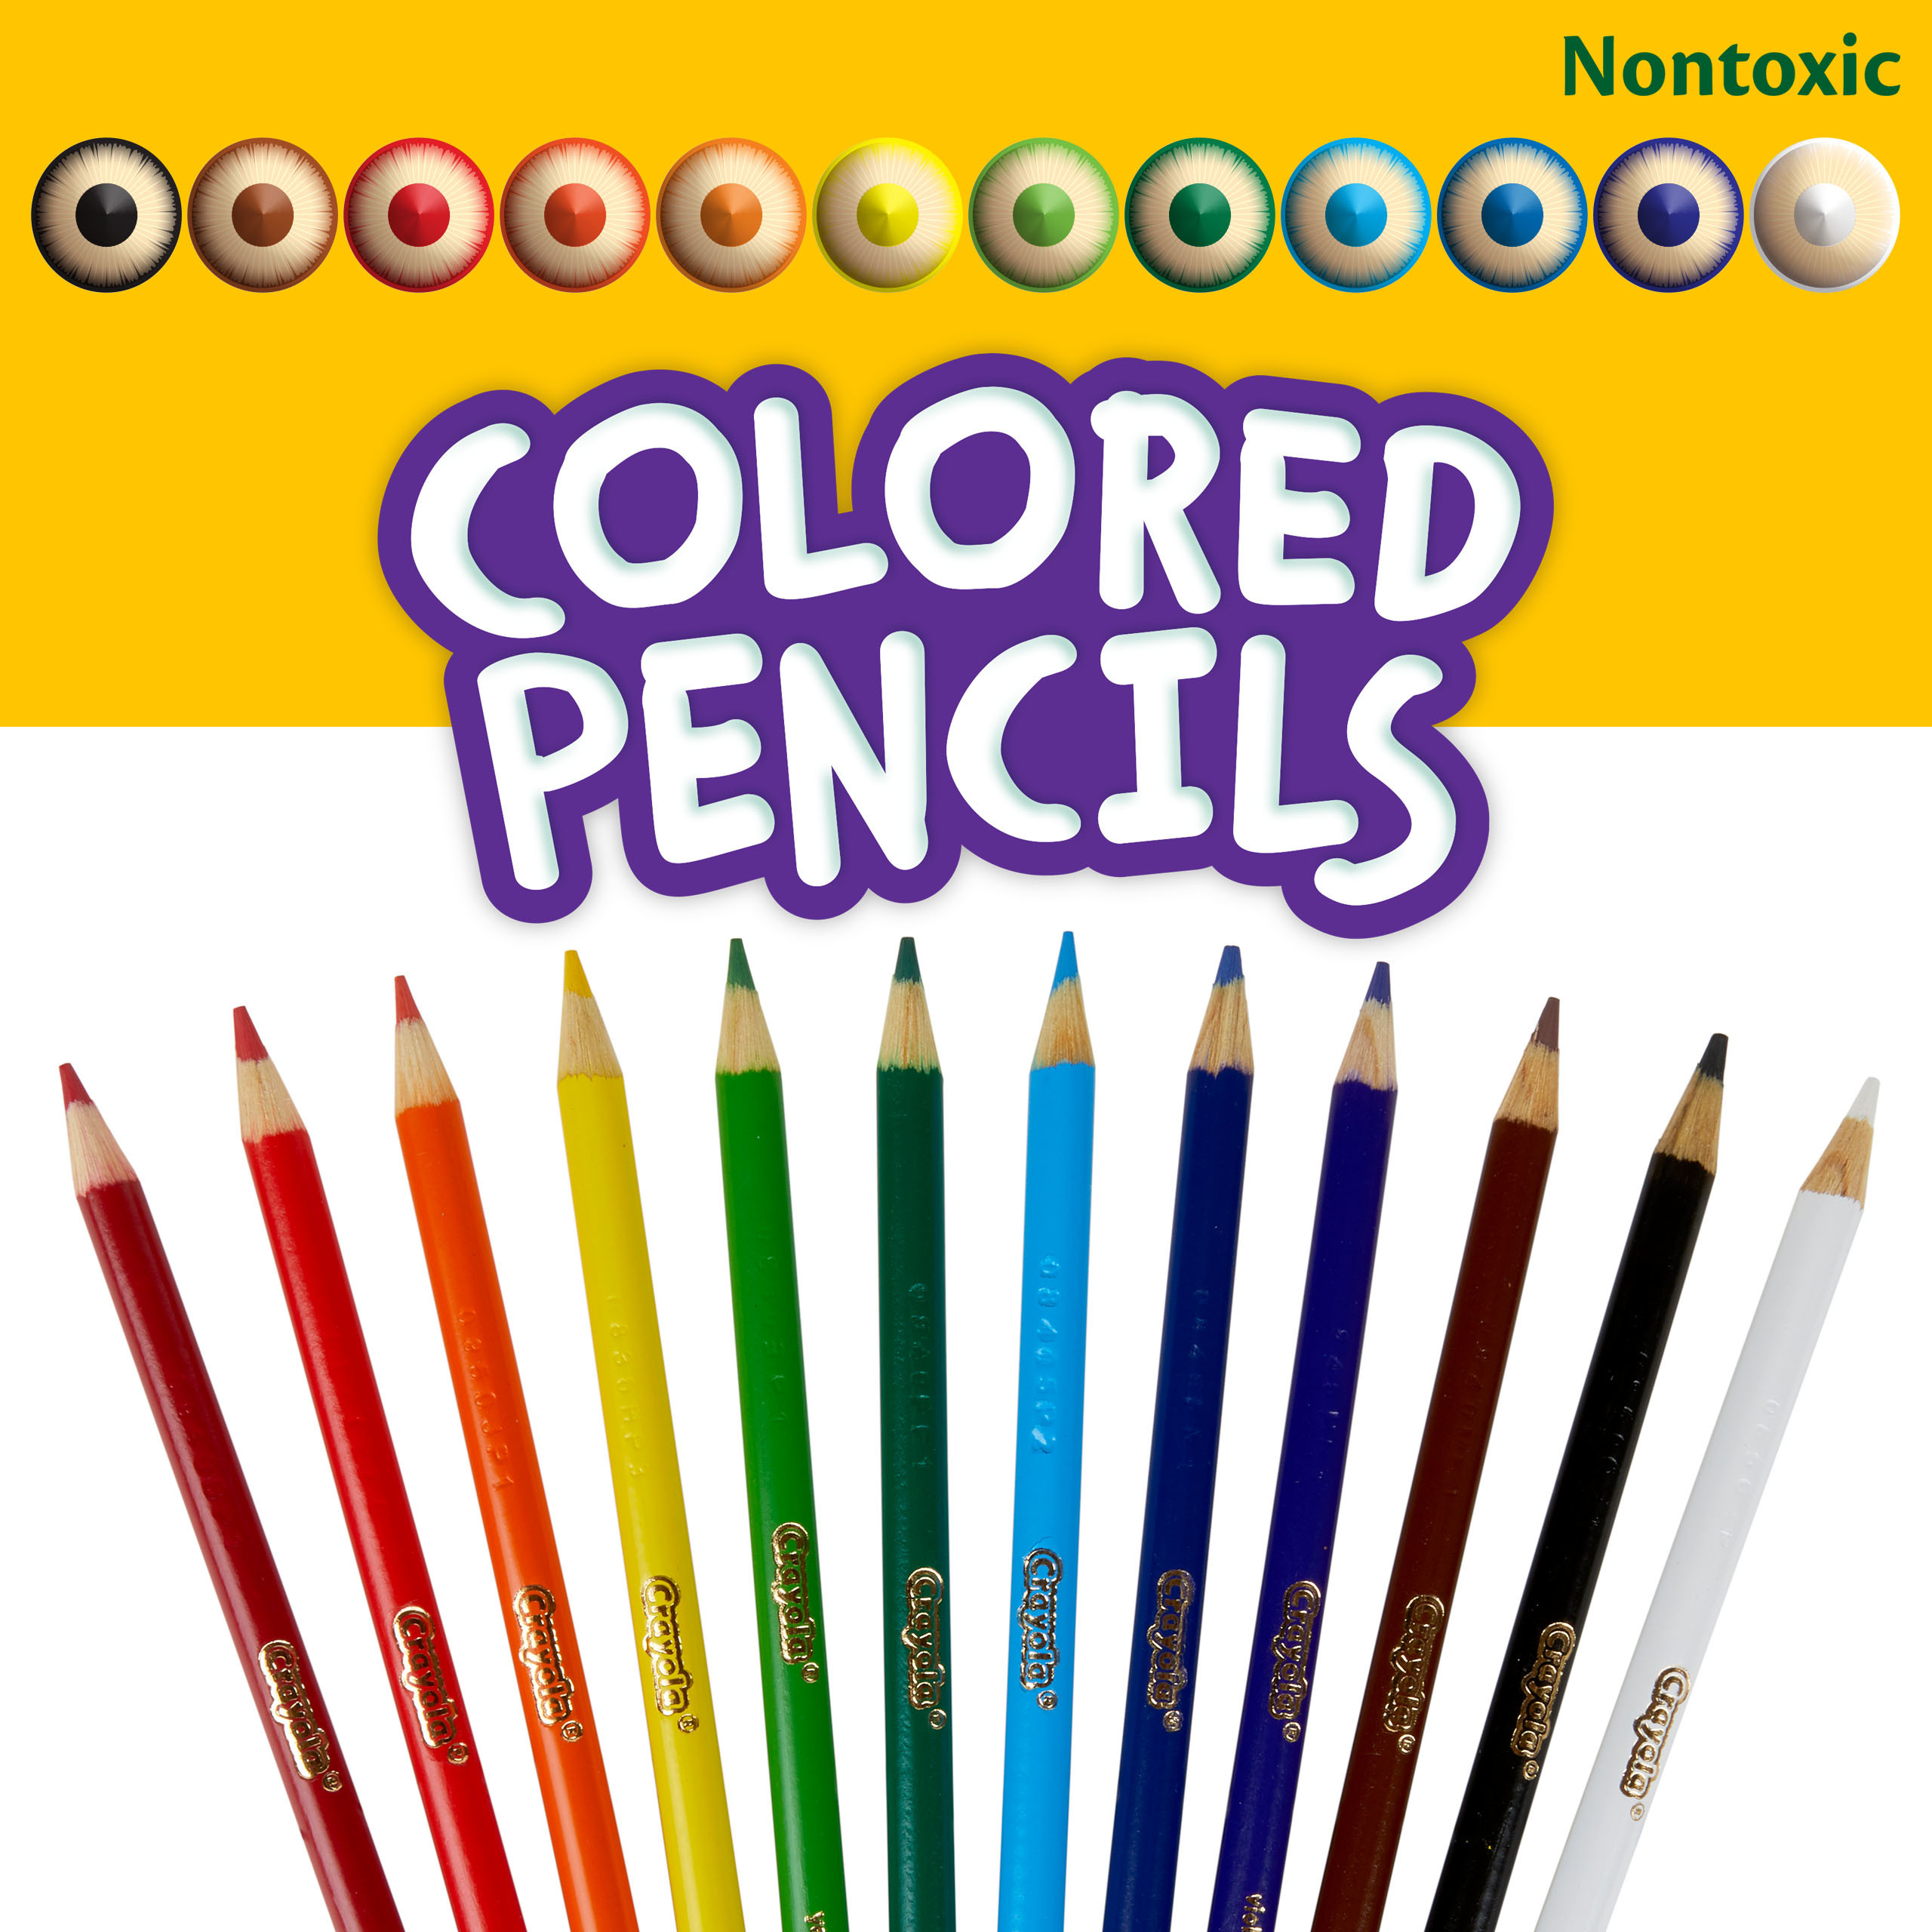 Crayola Colored Pencils, Assorted Colors, Pre-sharpened, Adult Coloring, 12 Count - image 3 of 7